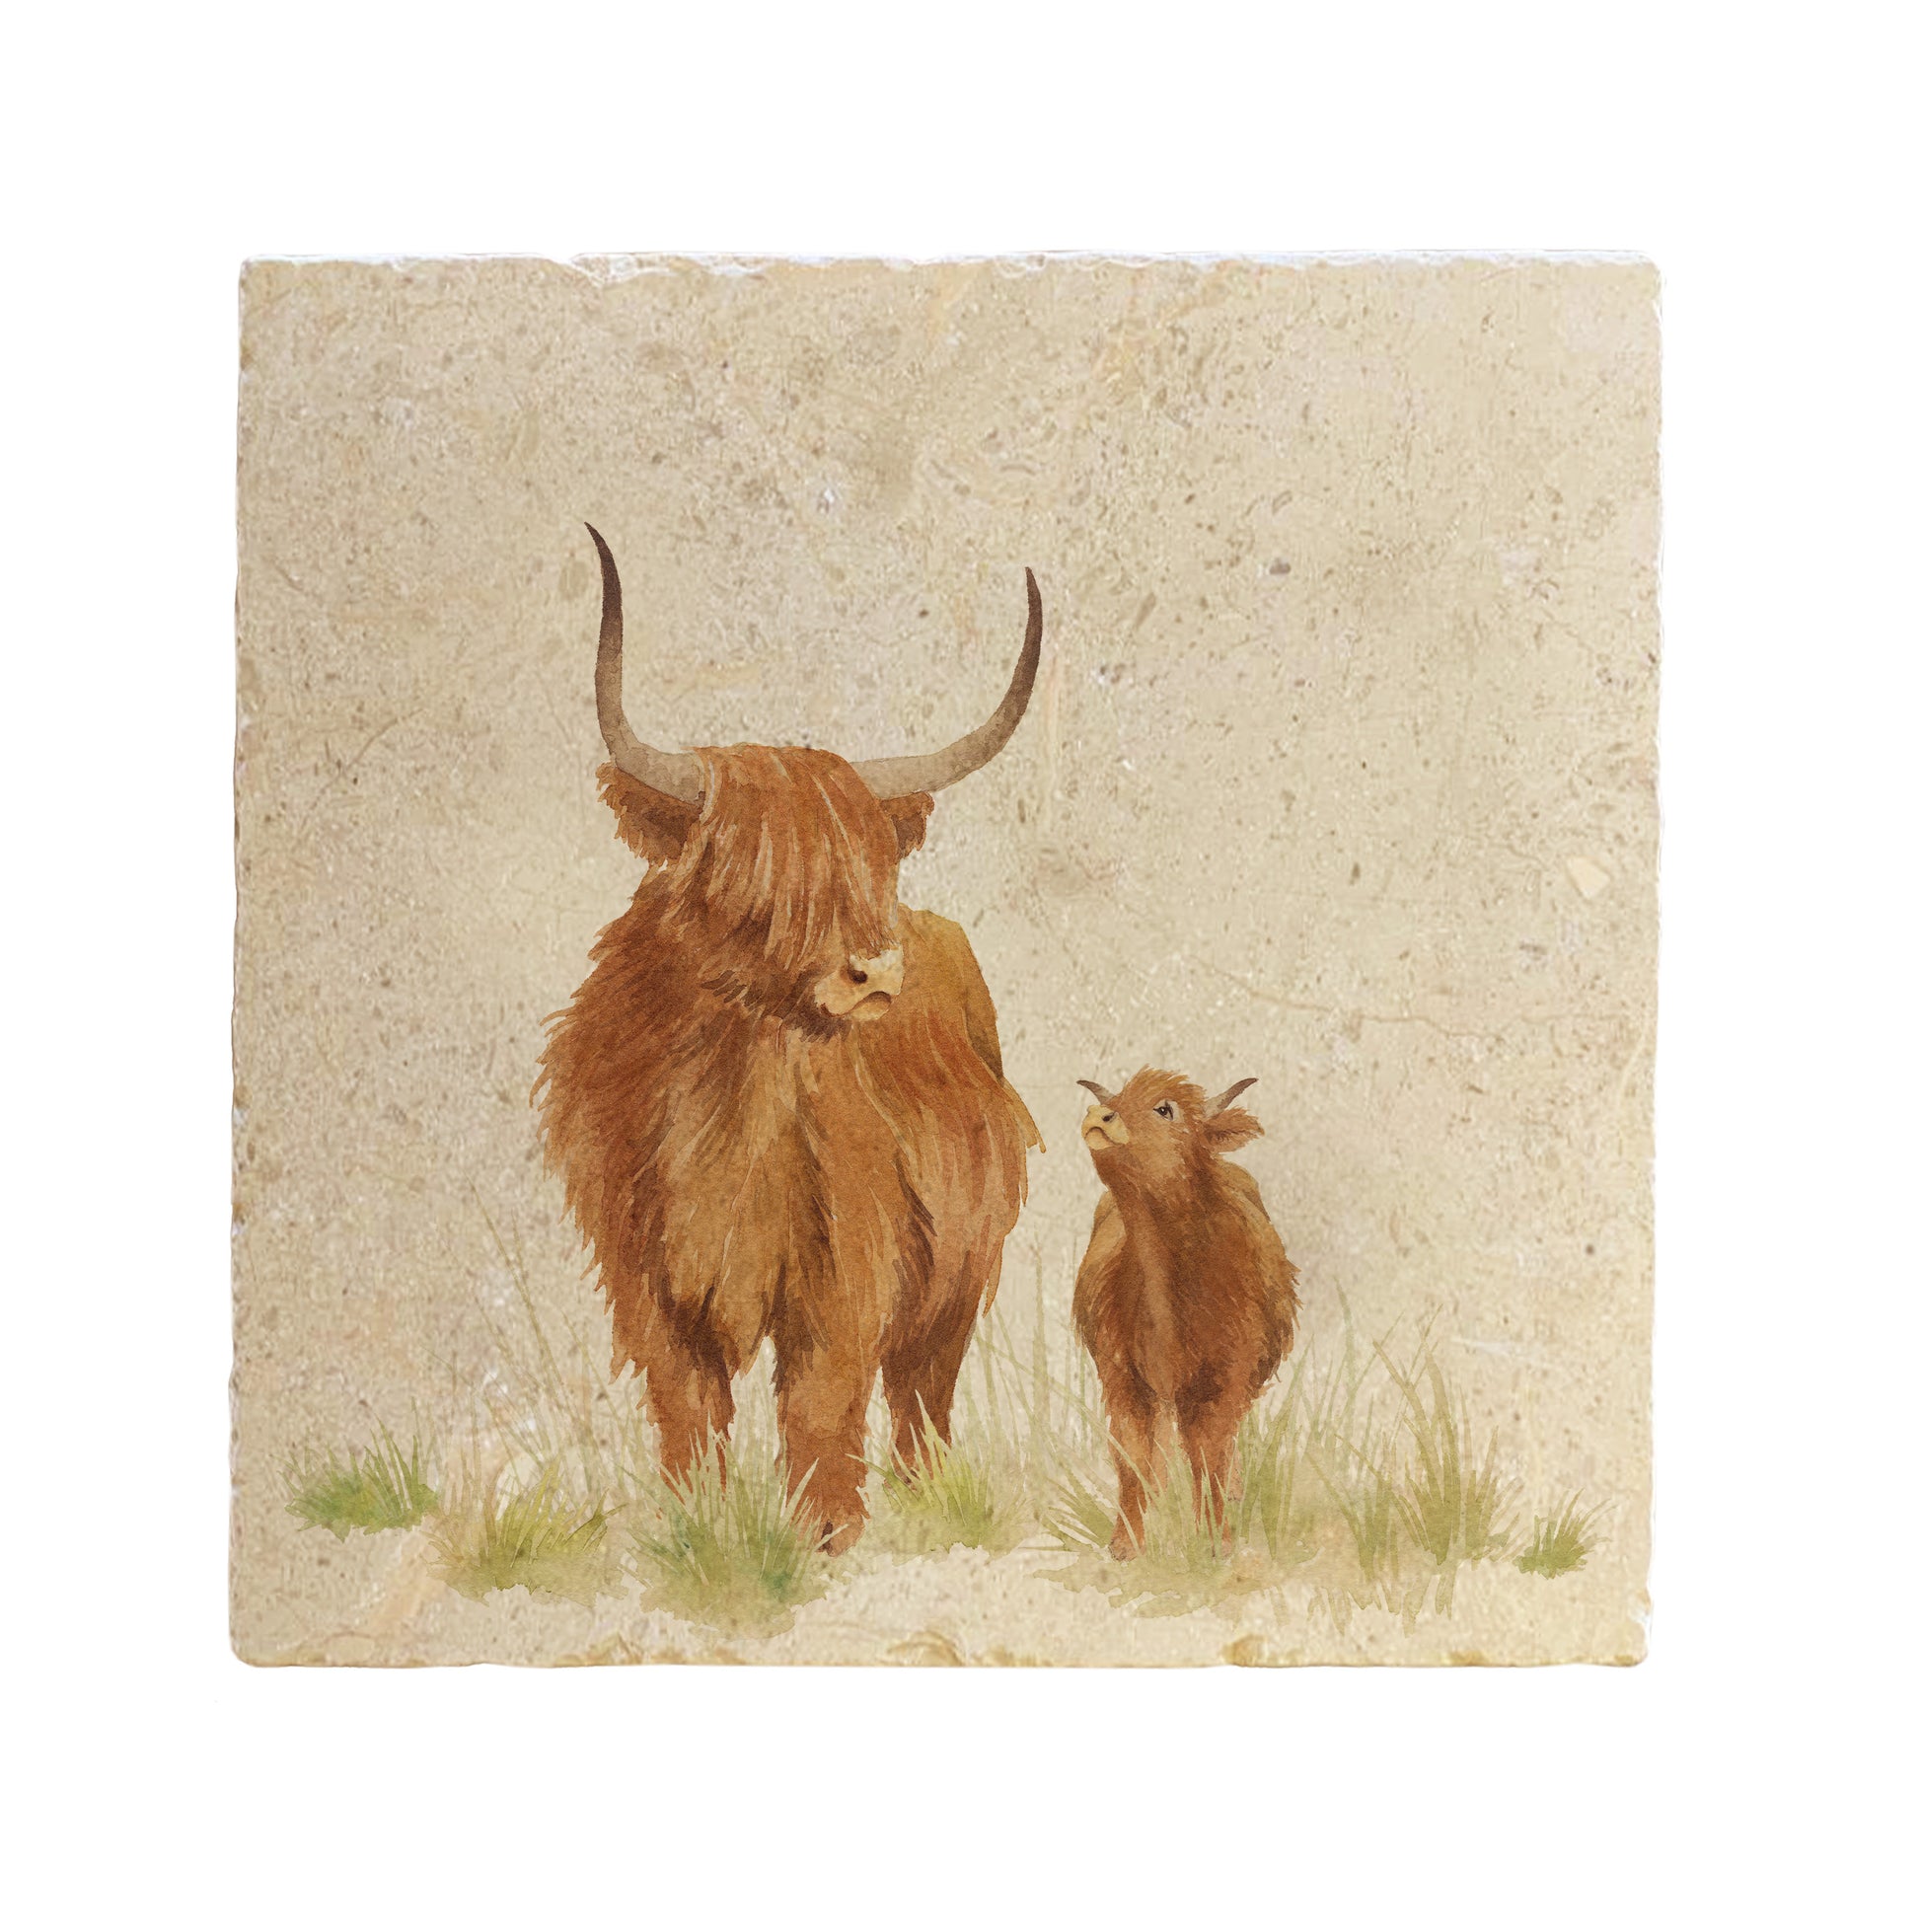 A square cream marble placemat featuring a watercolour countryside animal design of a Highland cow and calf.